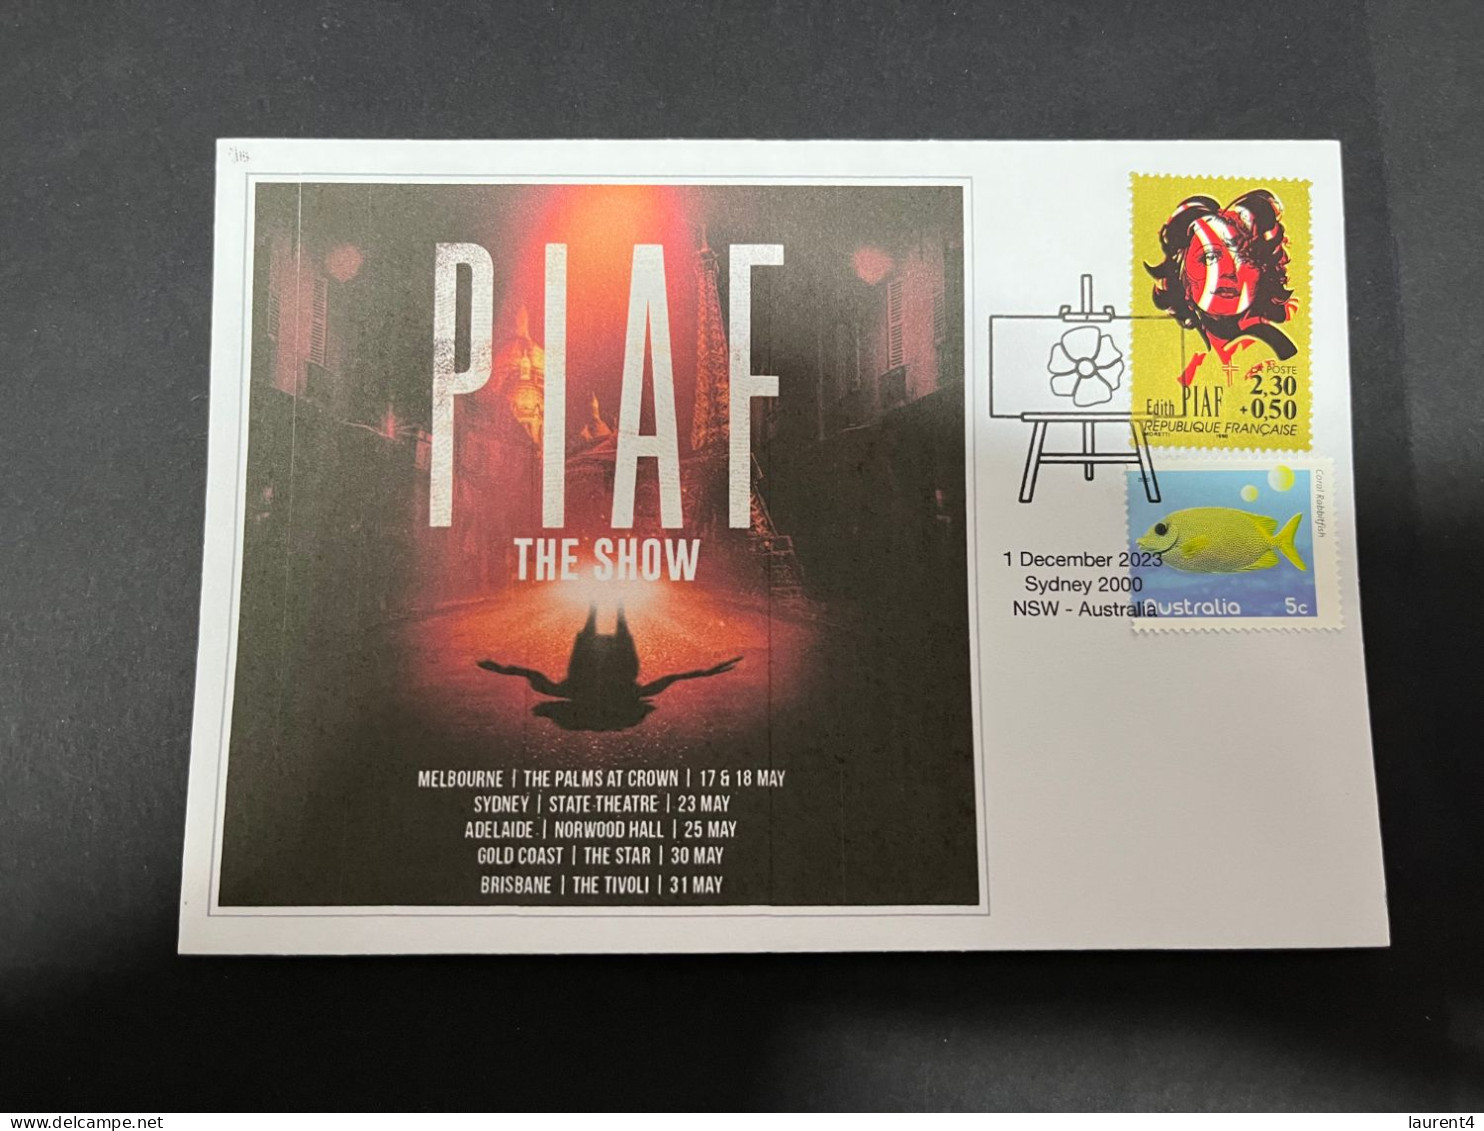 5-12-2023 (1 W 23) New Edith Piaf Six Concert Shows Anounced In Australia During May 2024 - With Edith Piaf Stamp - Singers